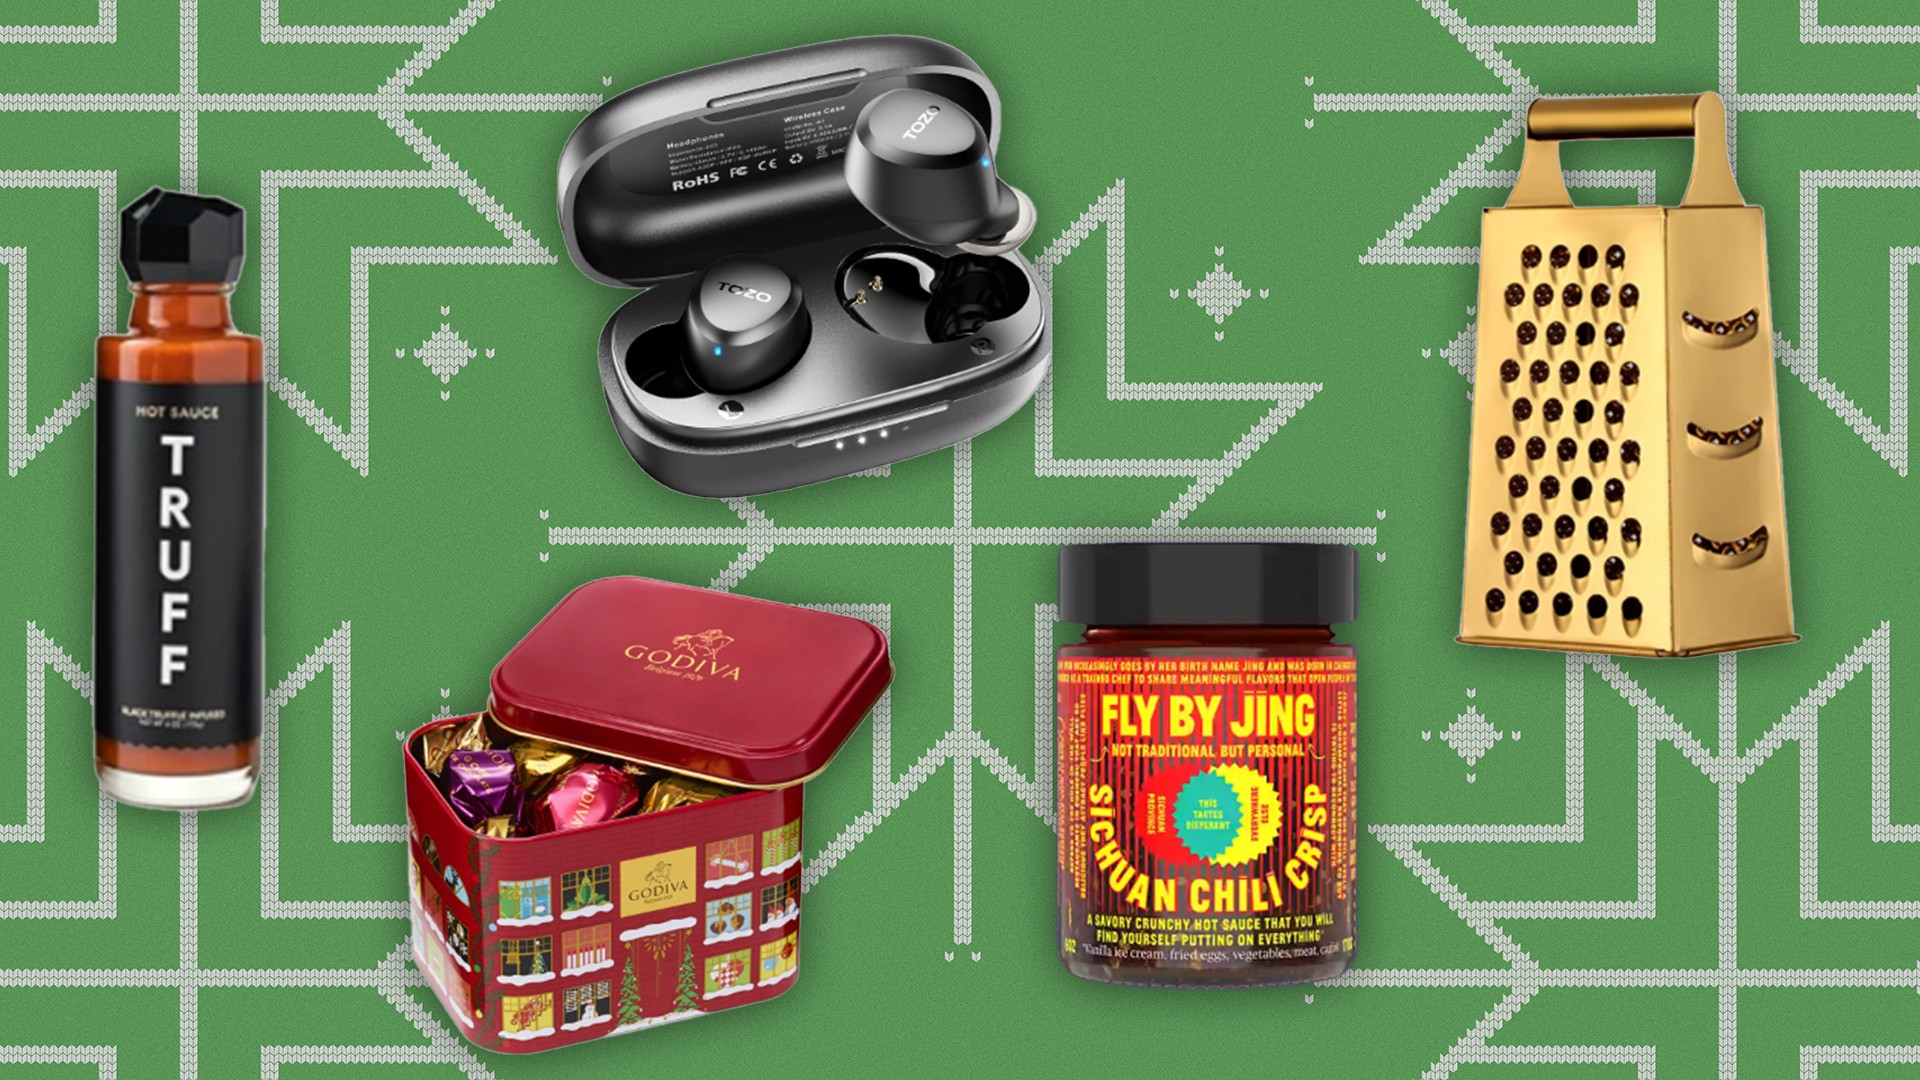 41 Most Popular Gifts of 2023 According to <i> Cosmo <i/> Readers